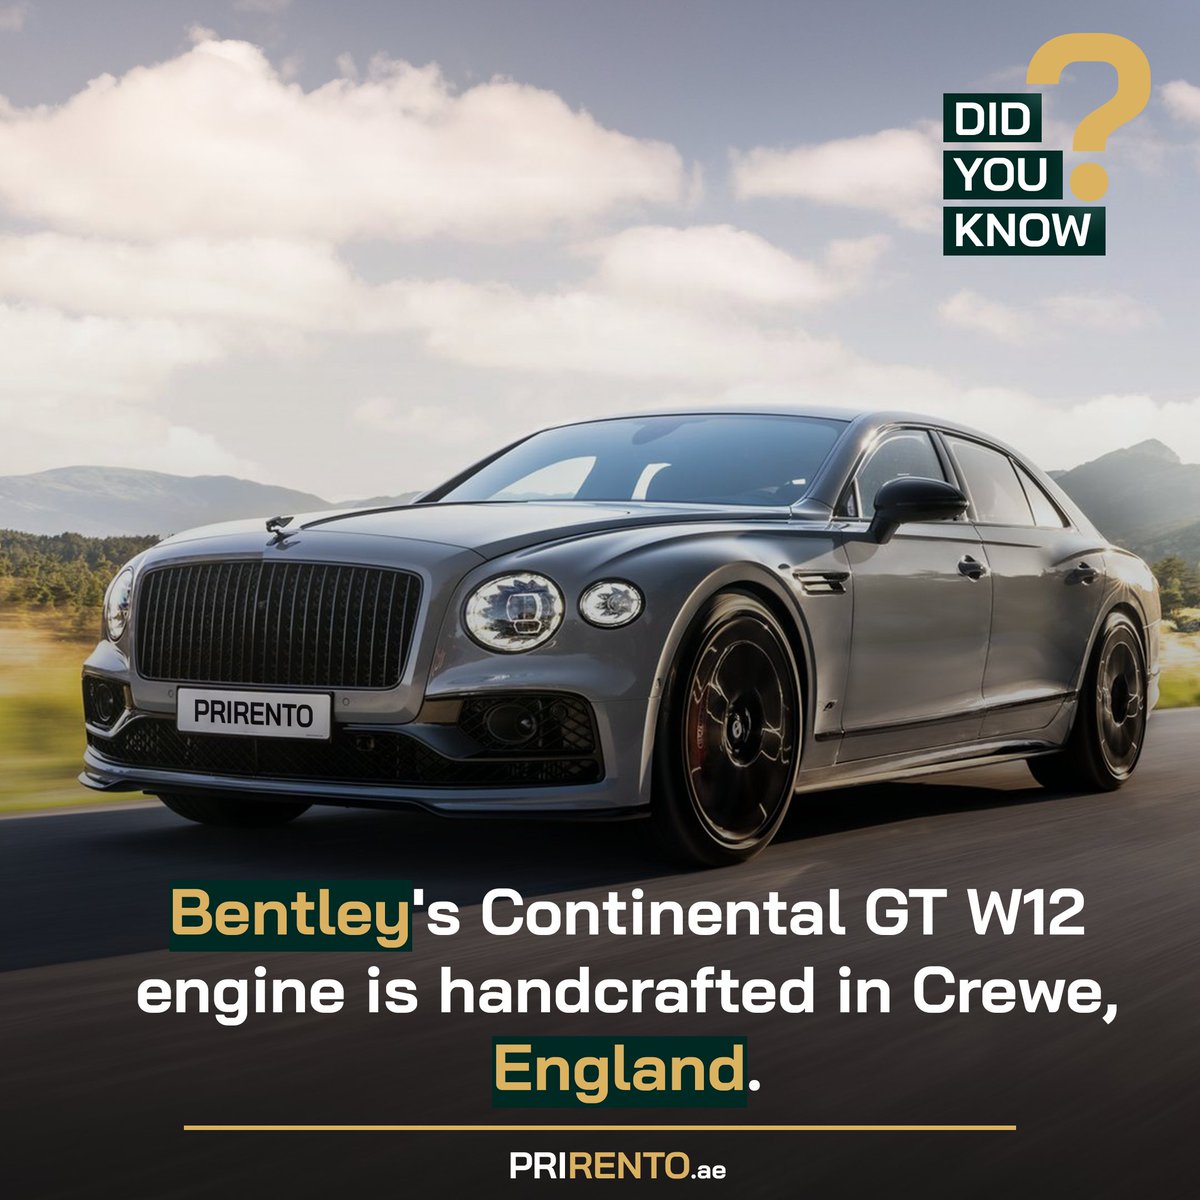 Did you know? Bentley's Continental GT W12 engine is handcrafted in Crewe, England. 
 #FactsOfTheDay #LuxuryRides #CarRentals #InterestingFacts #HighEndVehicles #LuxuryCarHire #DidYouKnowFacts #ExoticCars #LuxuryCarRental #CarFacts